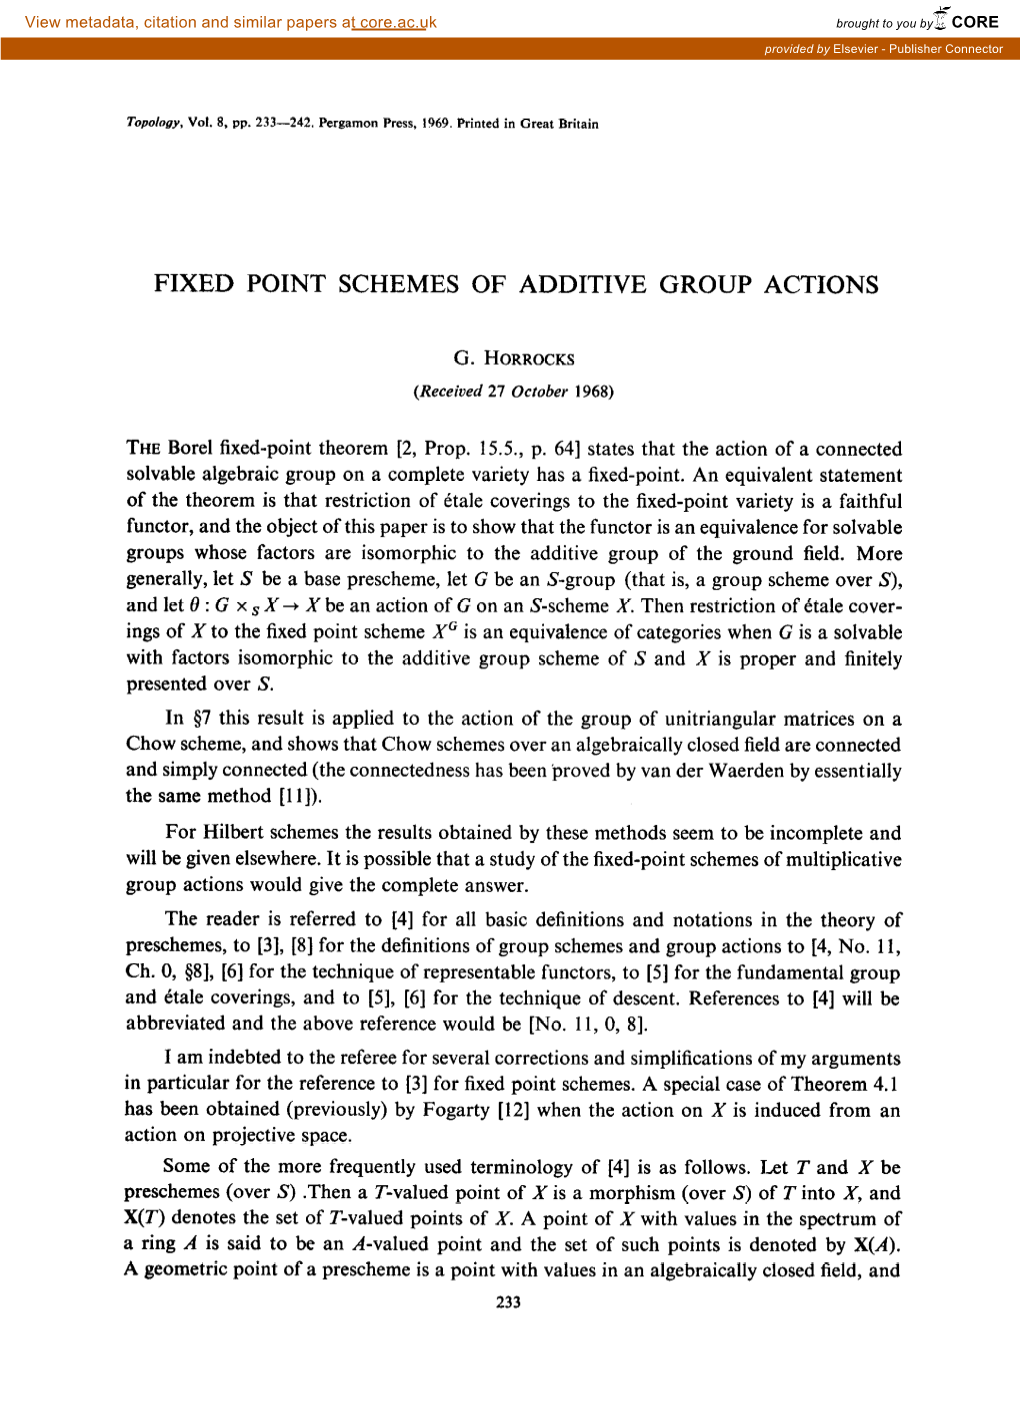 Fixed Point Schemes of Additive Group Actions